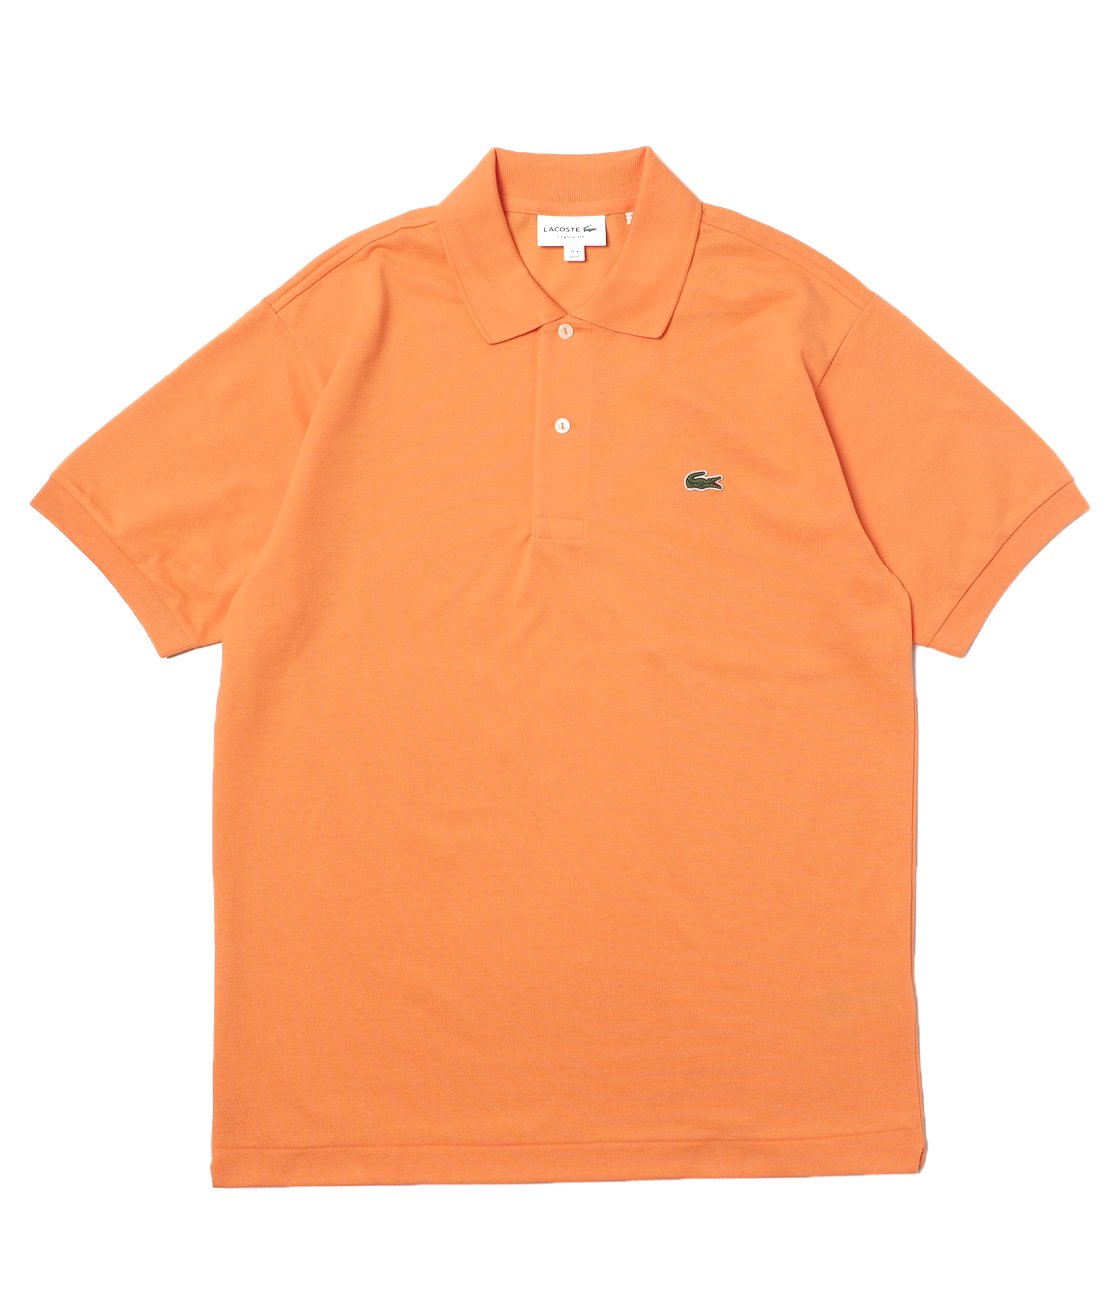 Lacoste L1212 S S Classic Piquet Polo Orange ポロシャツ ラコステ 並行輸入品 Hunky Dory